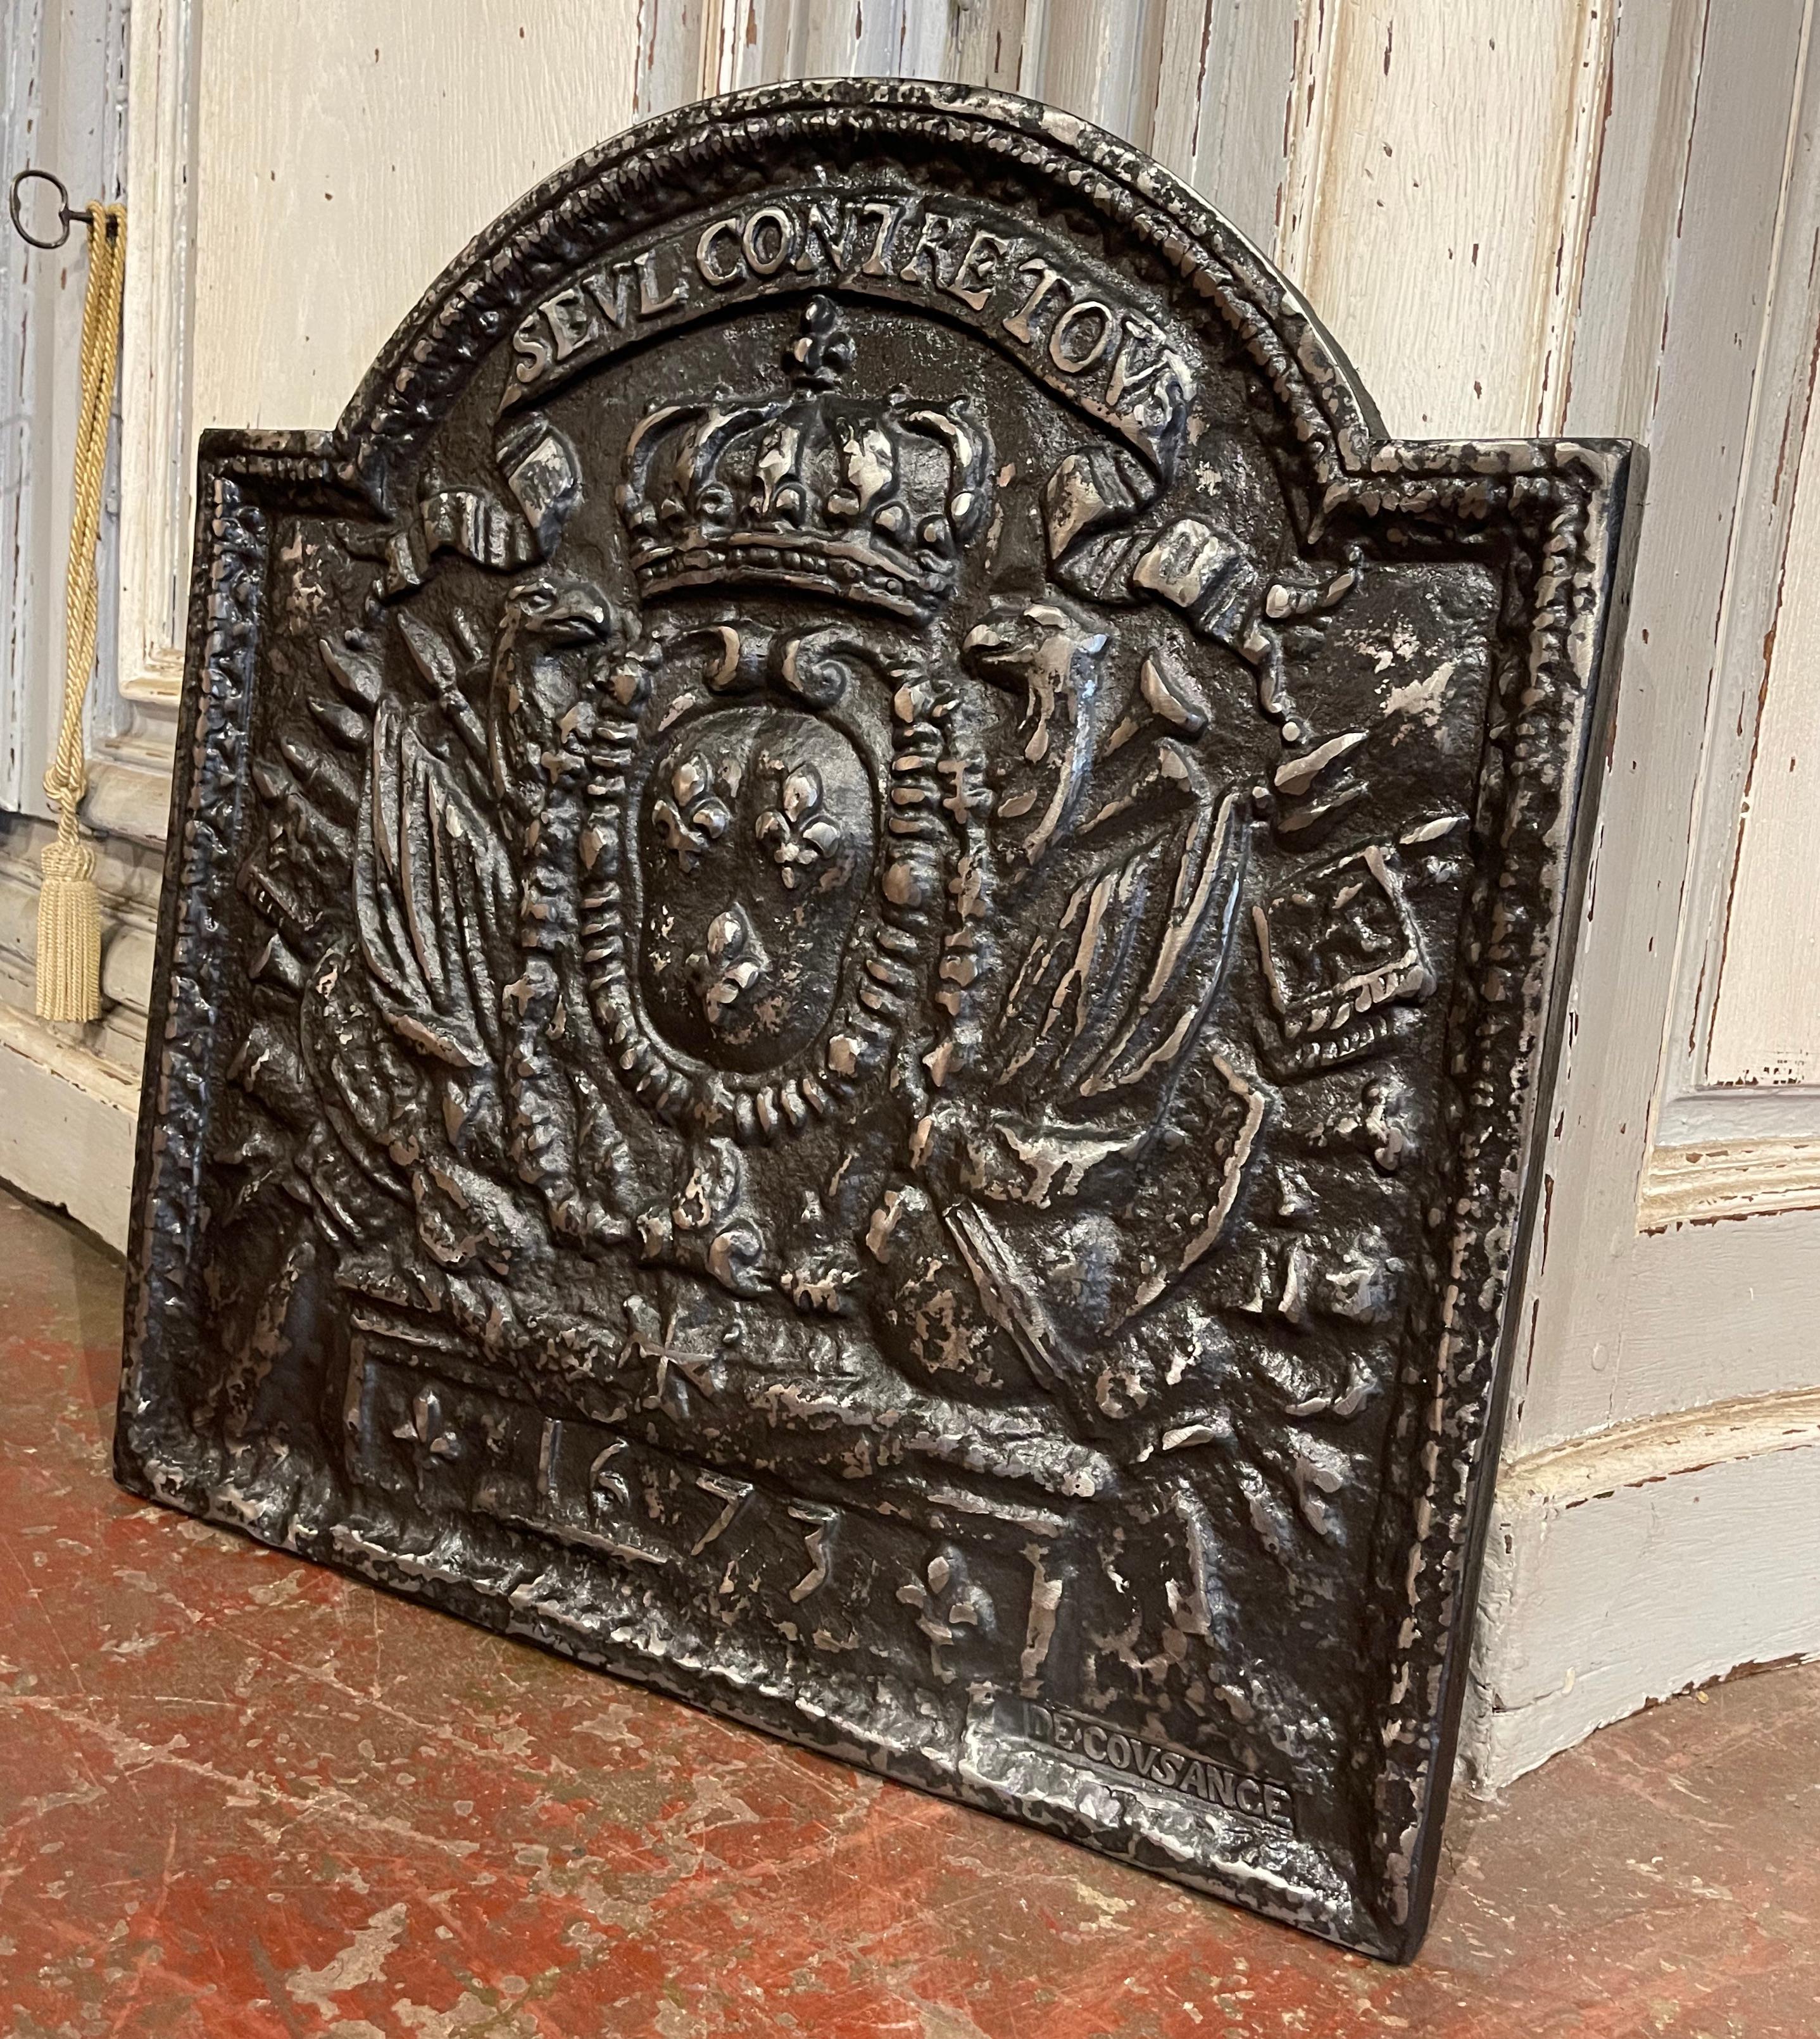 Decorate your fireplace or kitchen back splash with this elegant antique fire back. Crafted in France circa 1920 and almost square in shape, the ornate arched fireplace essential features a center medallion with the Royal Arms of France after